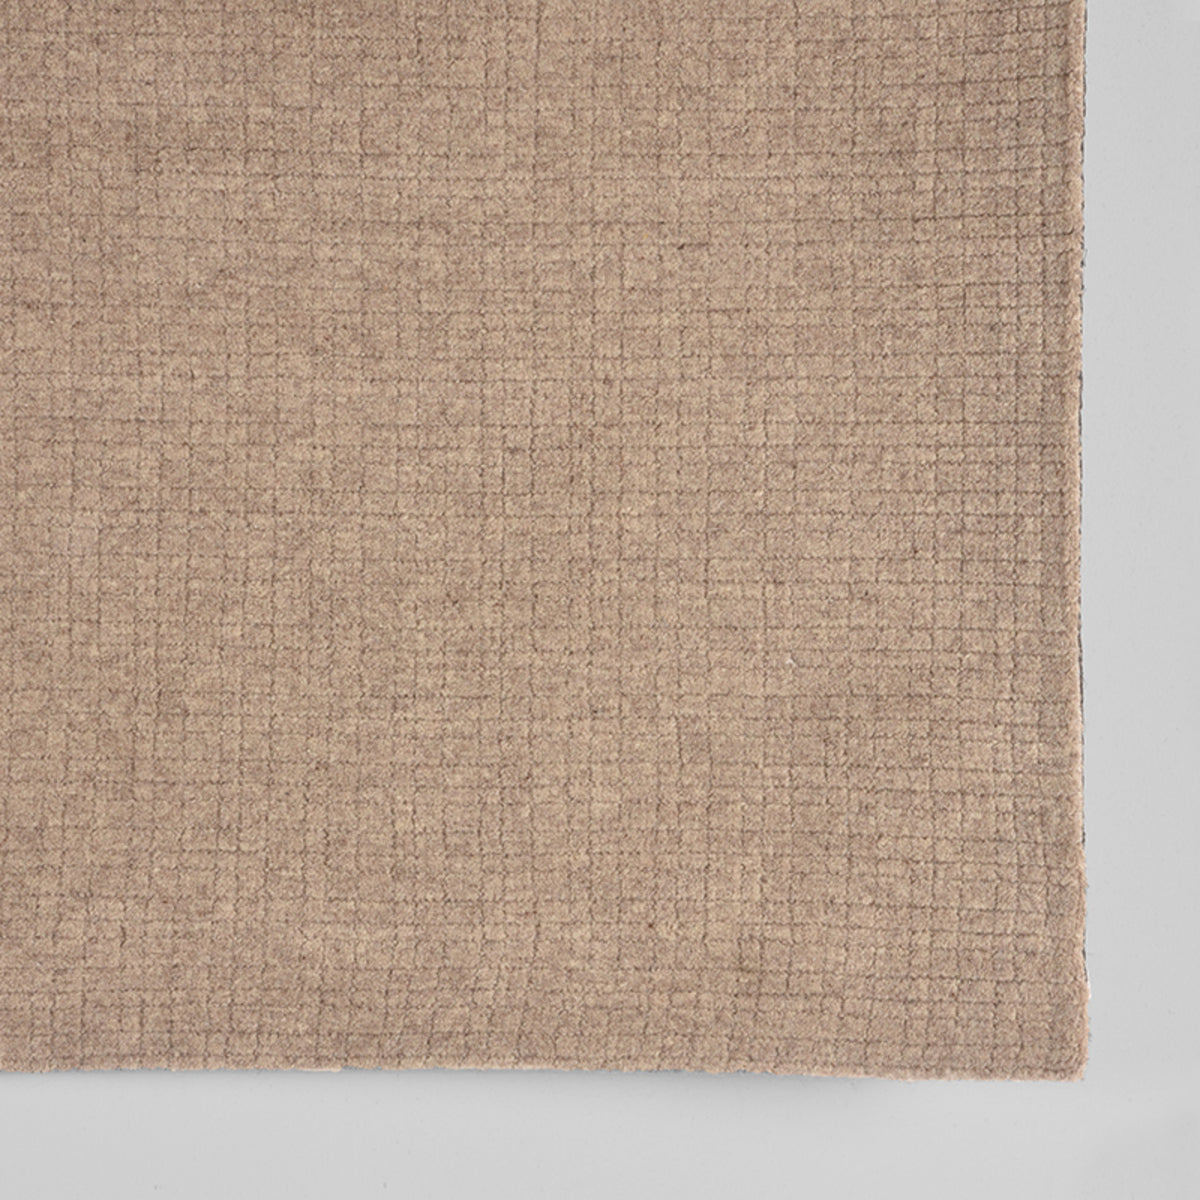 LABEL51 Rugs Wolly - Taupe - Wool - 200x300 cm